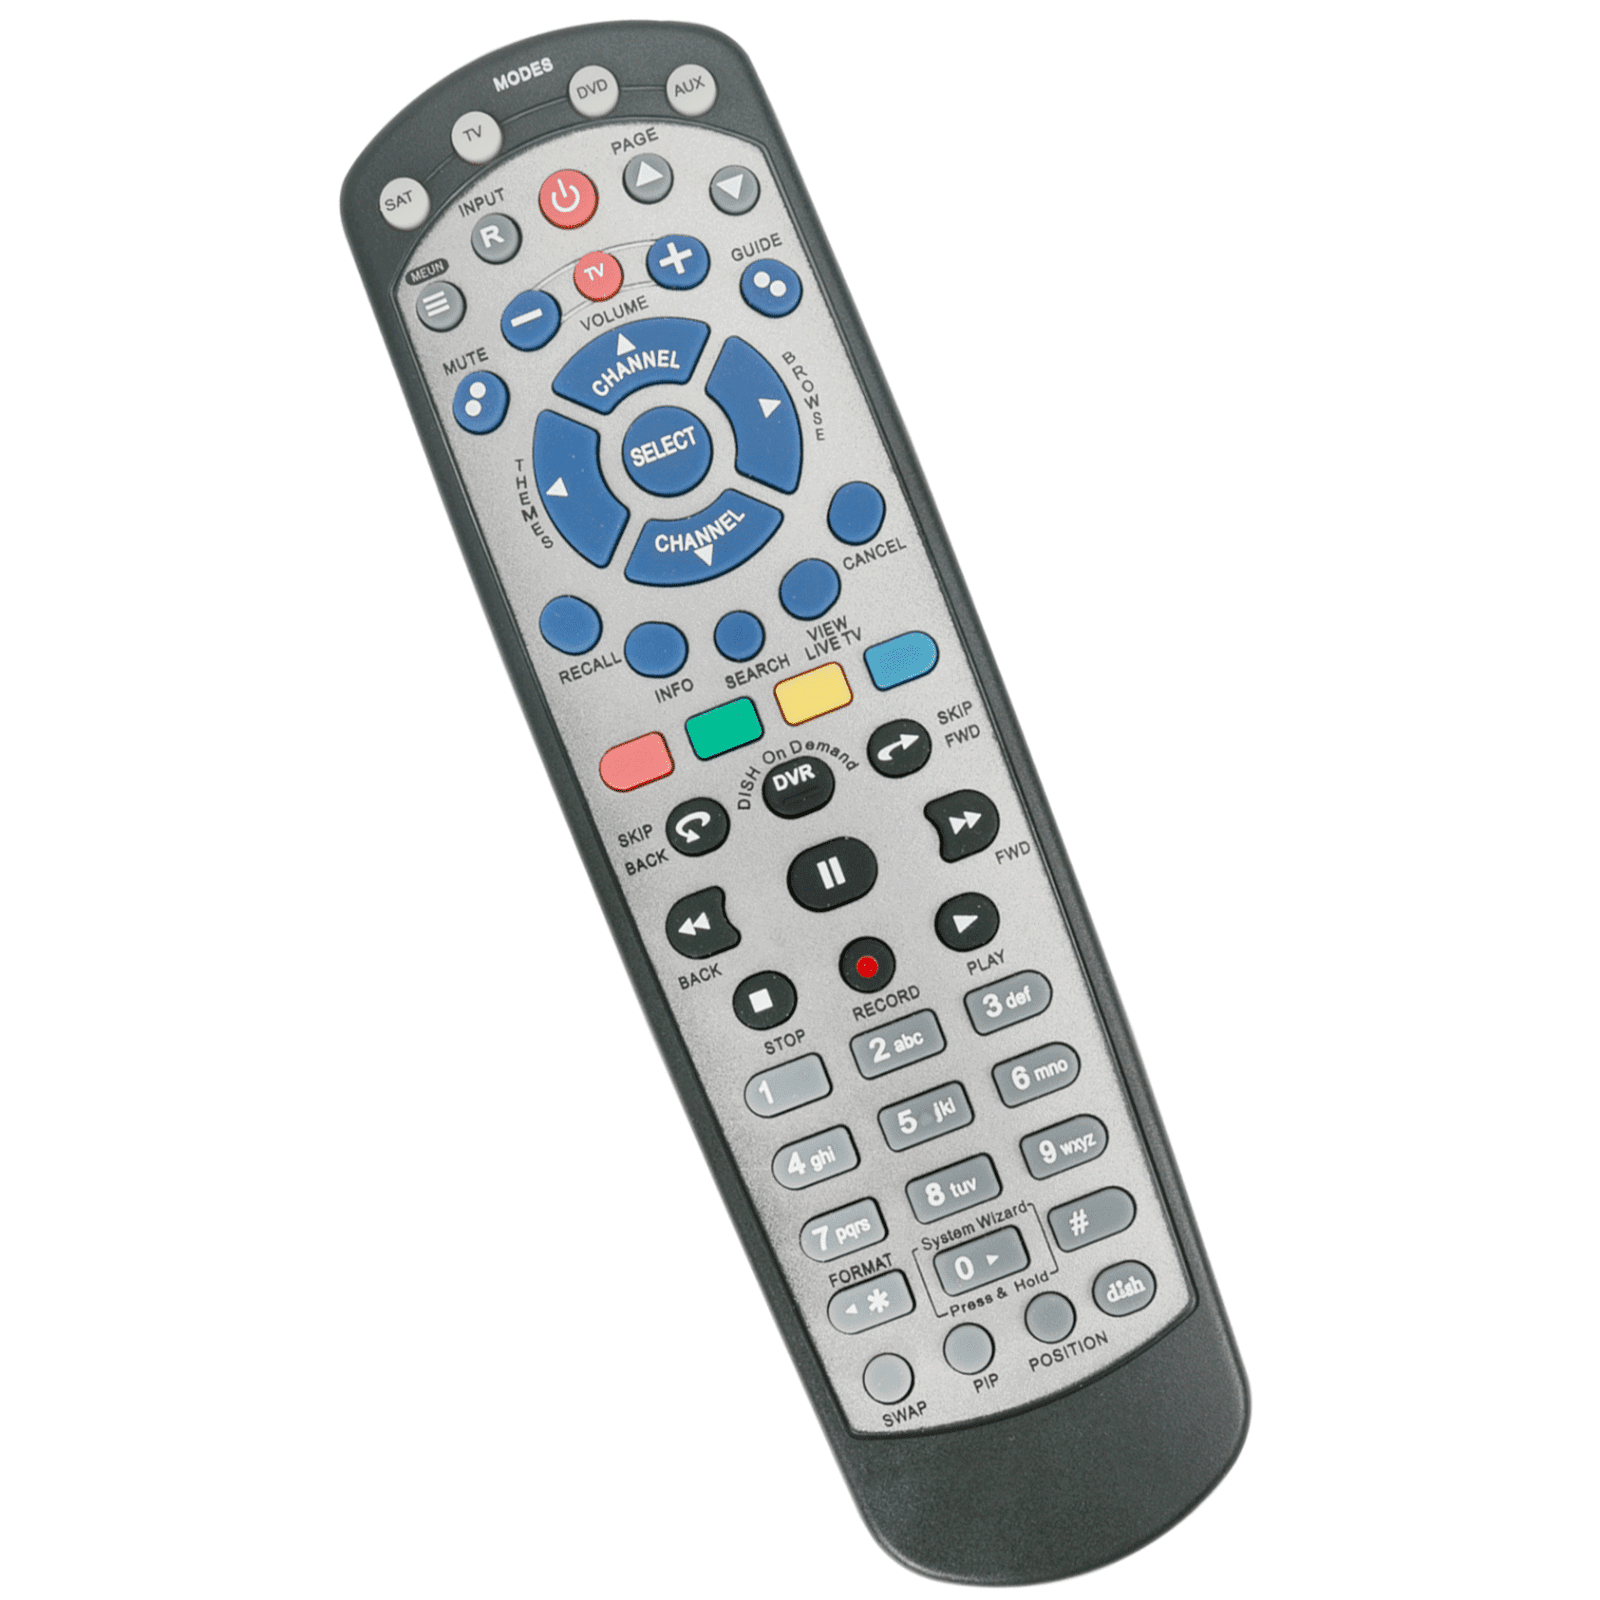 New Replaced For DISH 20.1 For Dish-Network IR Satellite Receiver Remote Control 